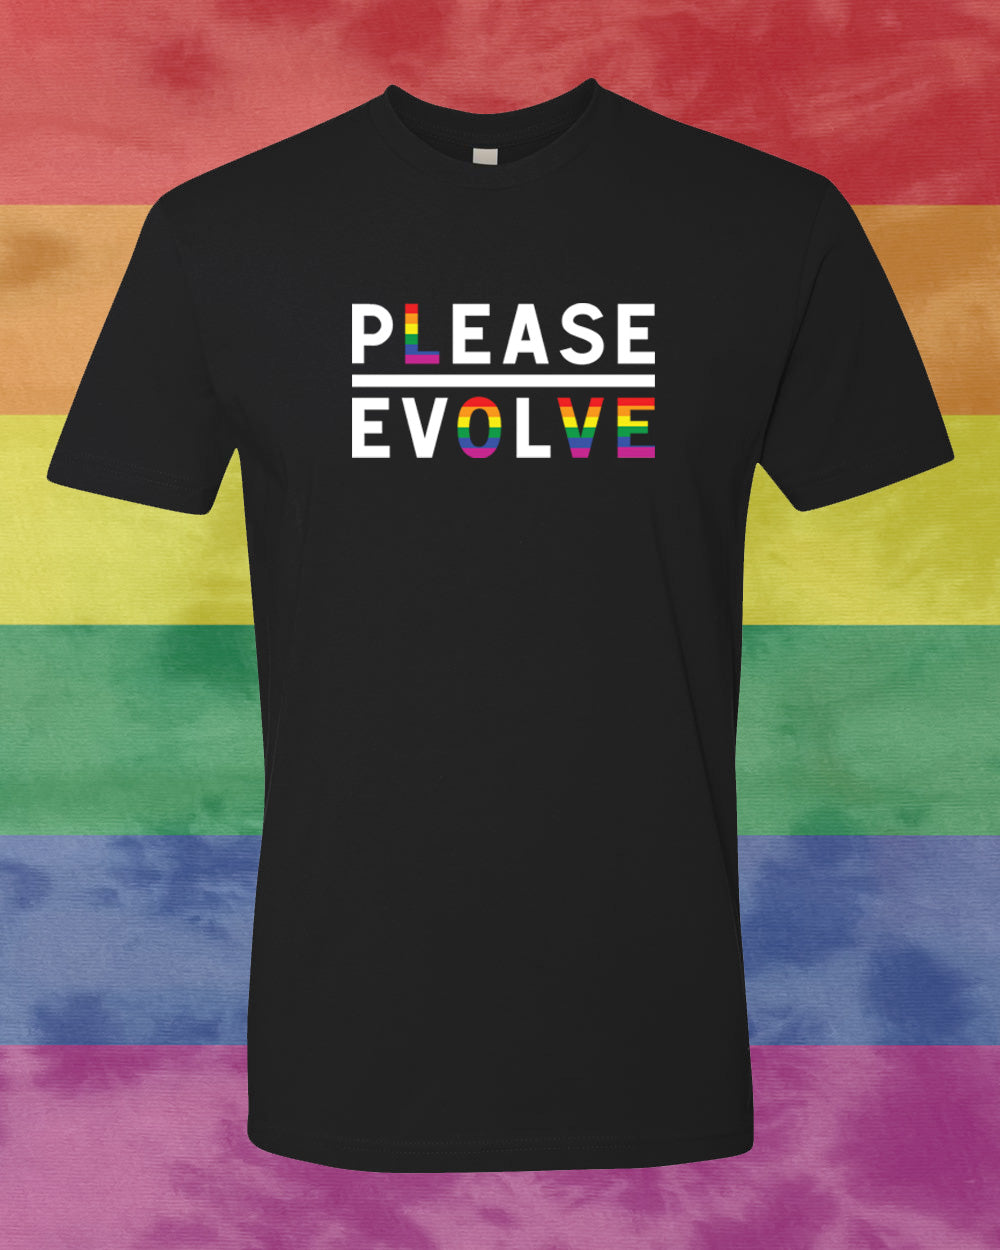 Please Love Black Tee with Pride logo FREE SHIPPING